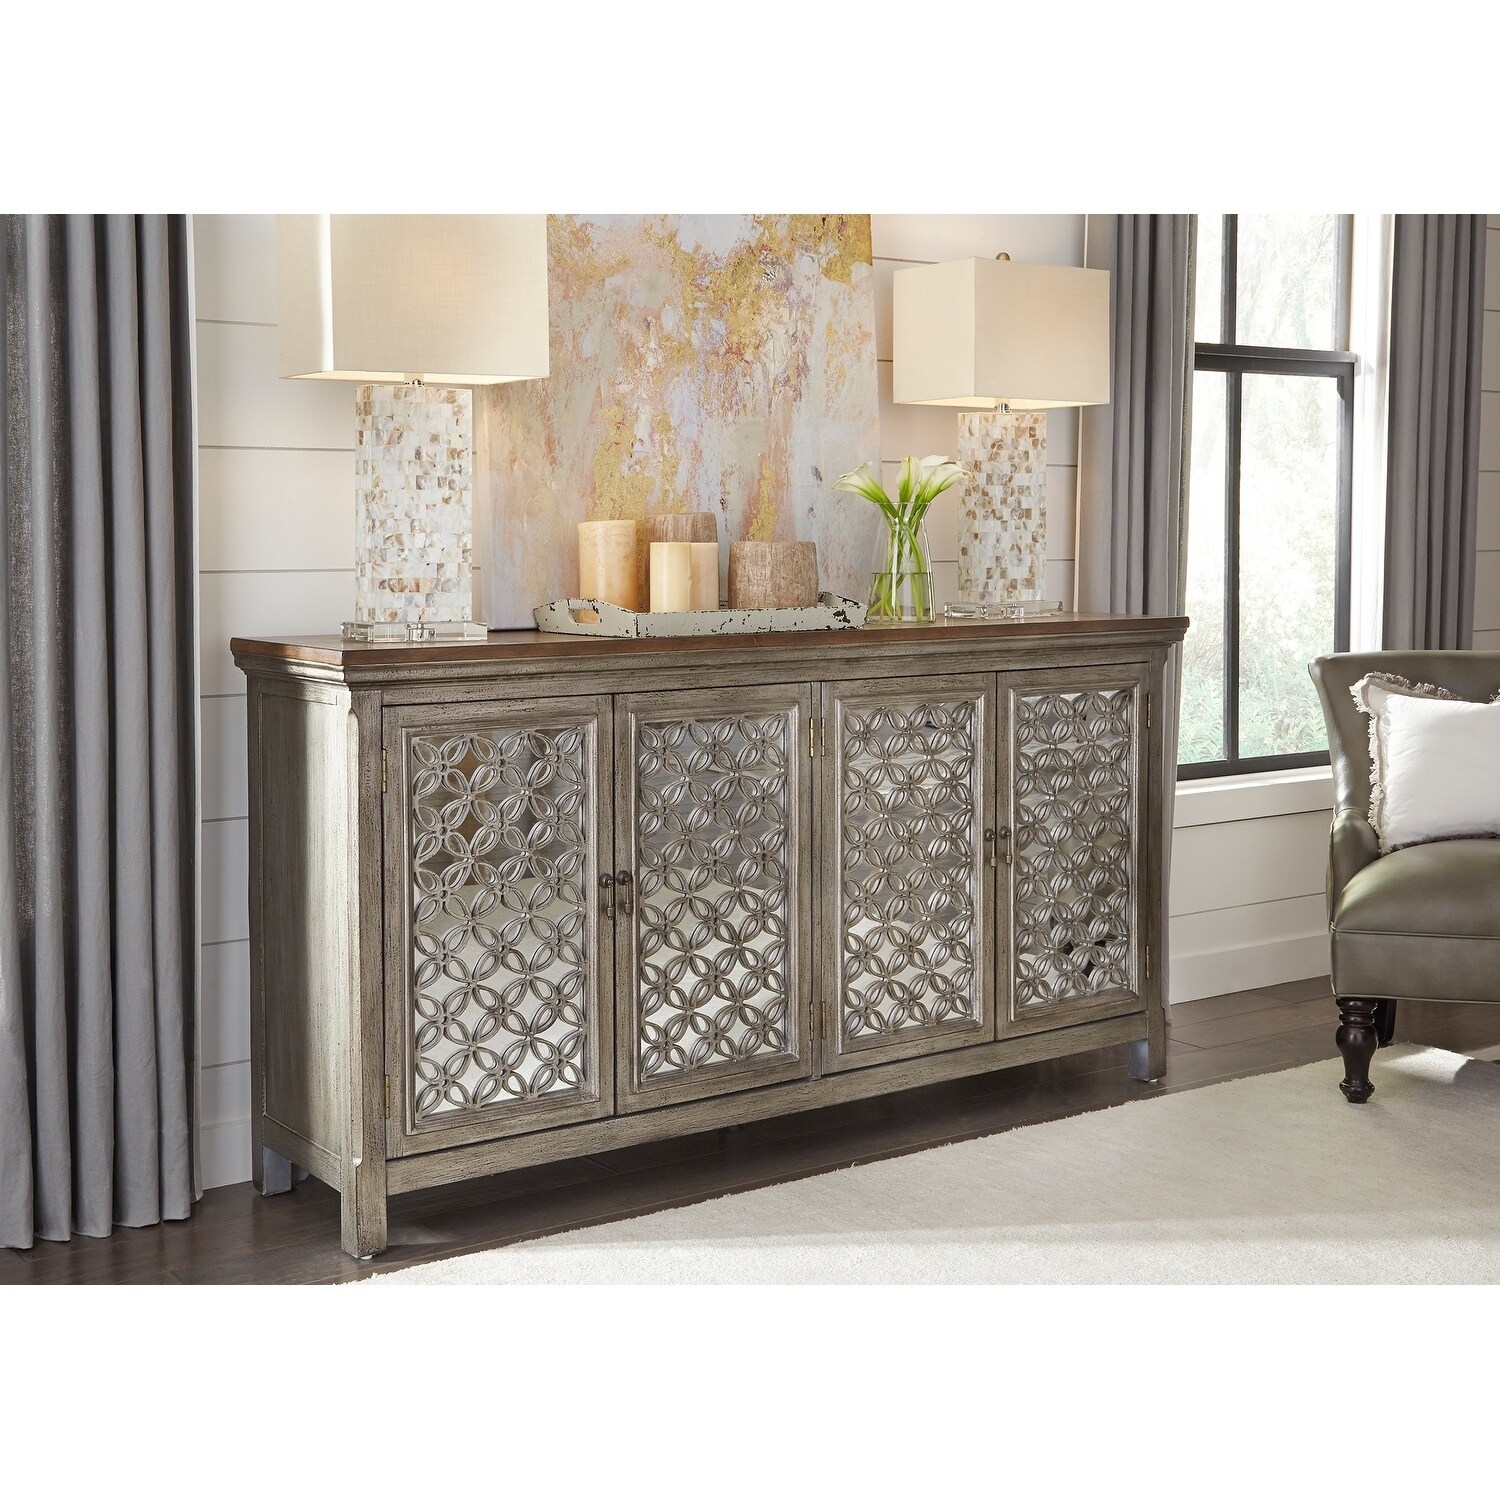 Tracy White Dusty Wax 4-door Accent Cabinet